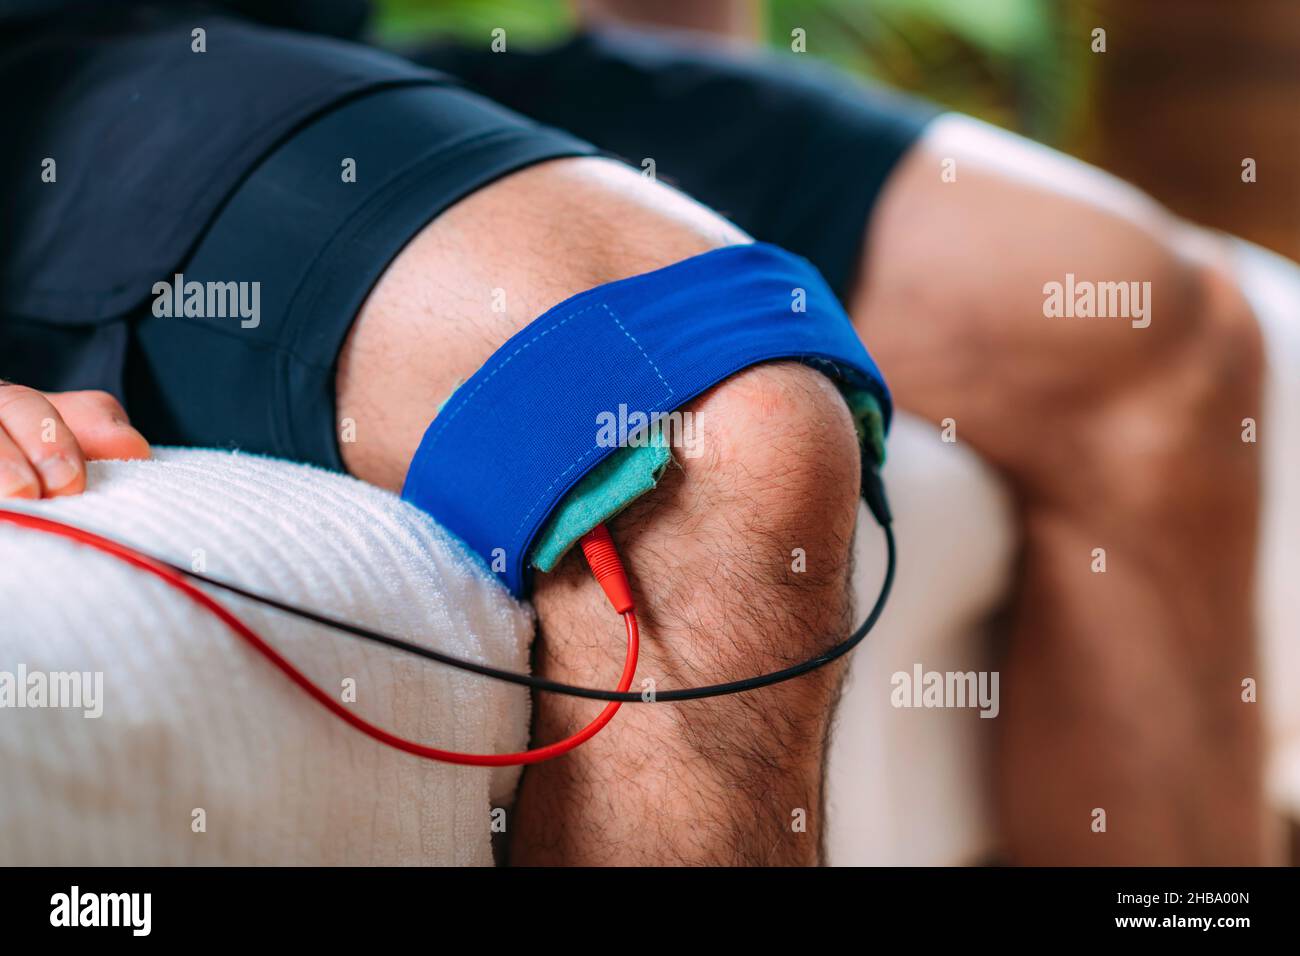 https://c8.alamy.com/comp/2HBA00N/tens-transcutaneous-electrical-nerve-stimulation-knee-physical-therapy-2HBA00N.jpg